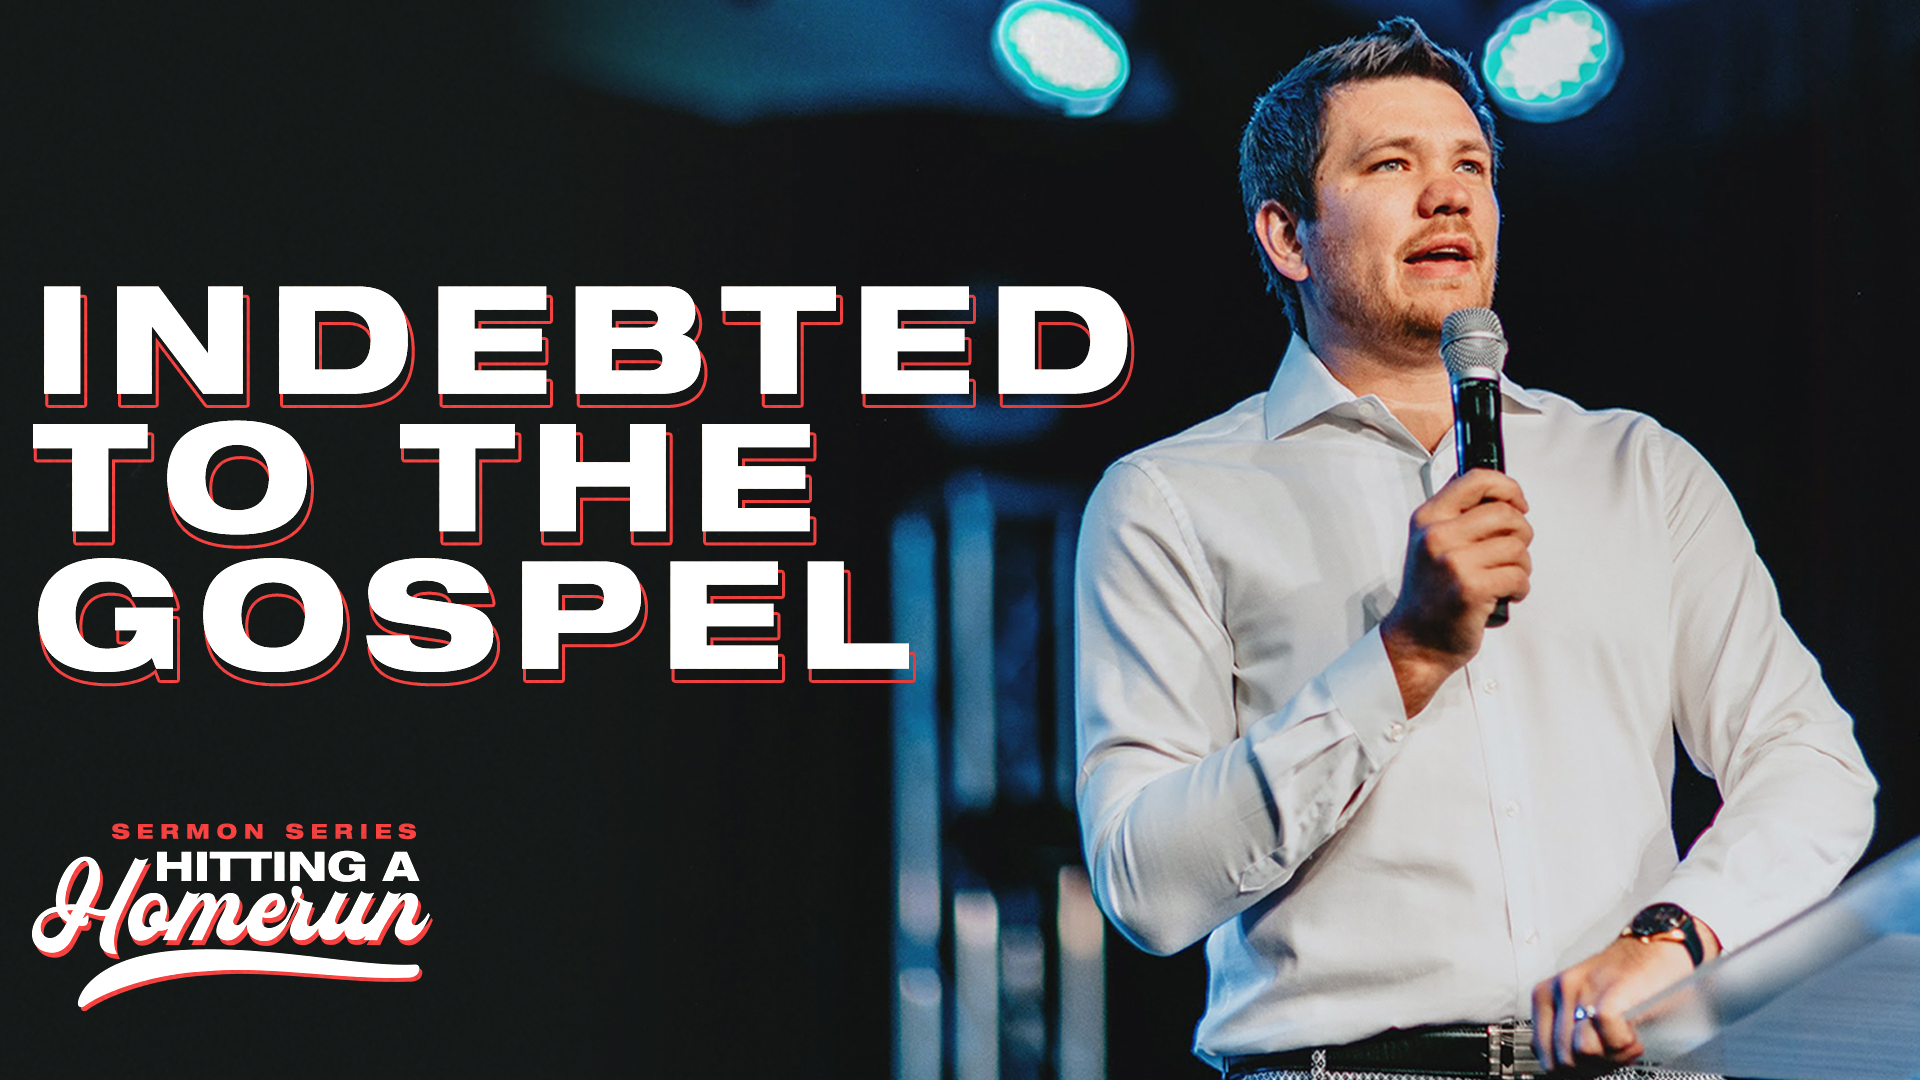 Featured Image for “Indebted to the Gospel”